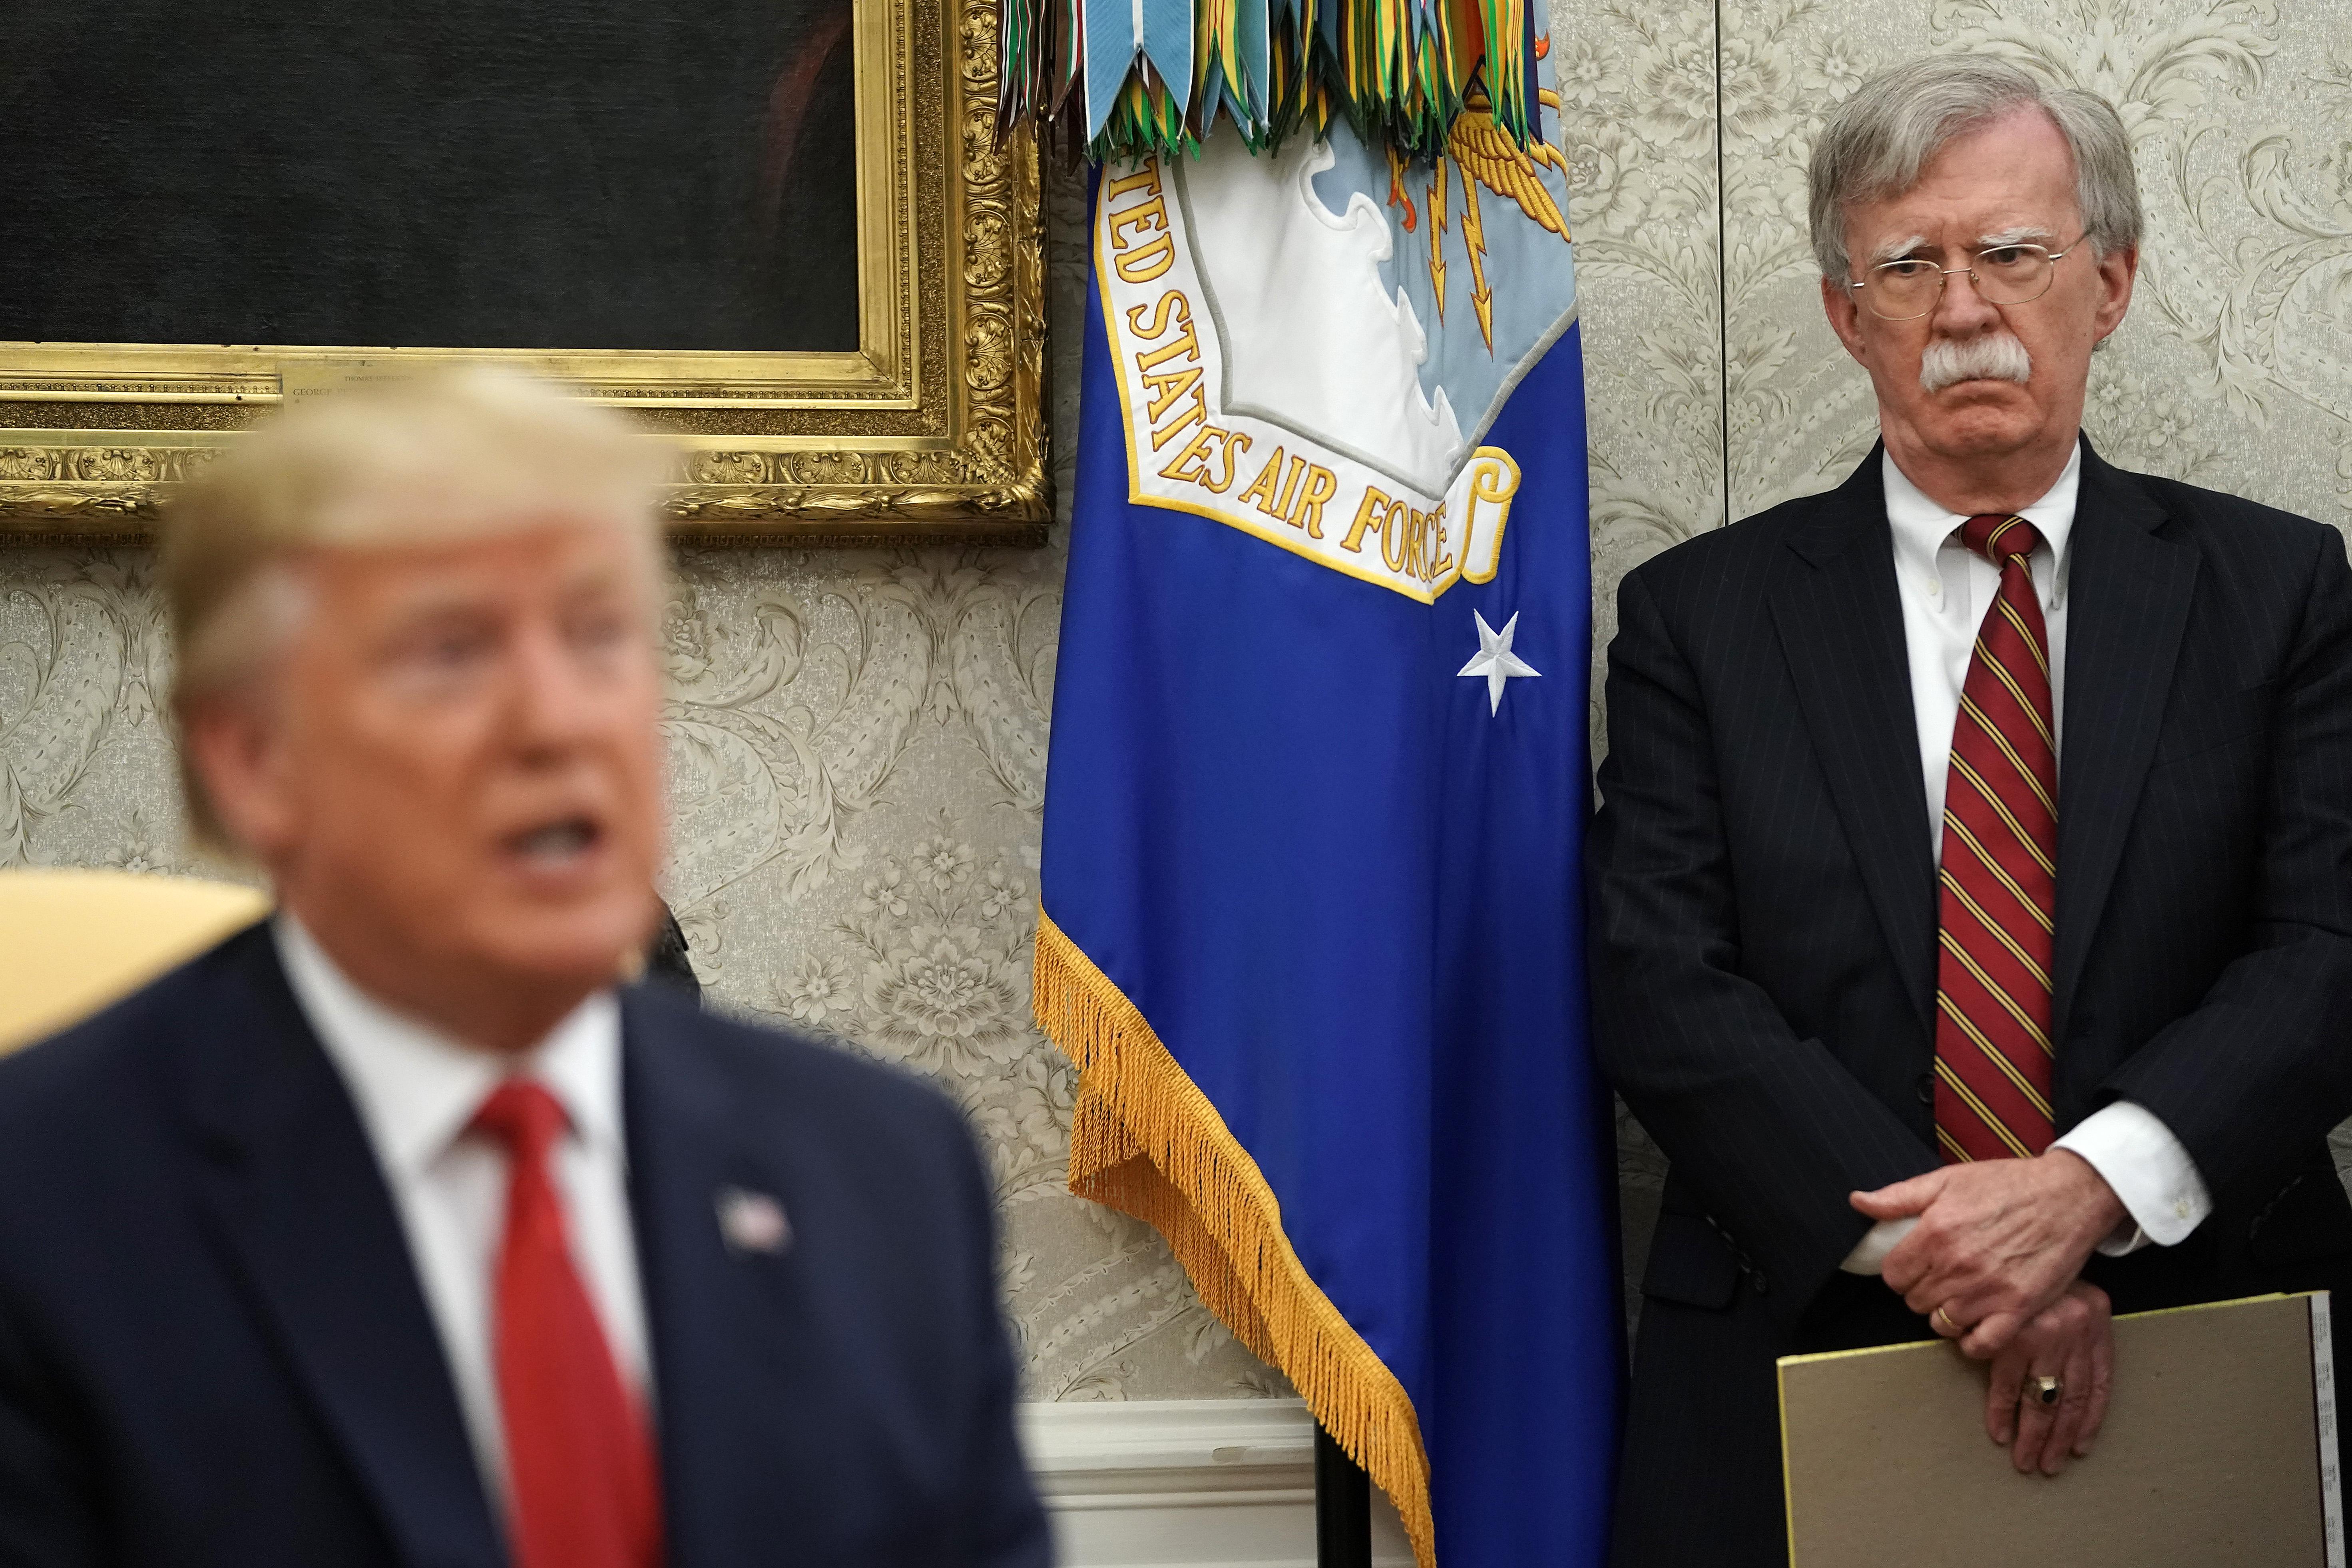 Former White House National Security Advisor John Bolton stands behind President Trump in the Oval Office. 